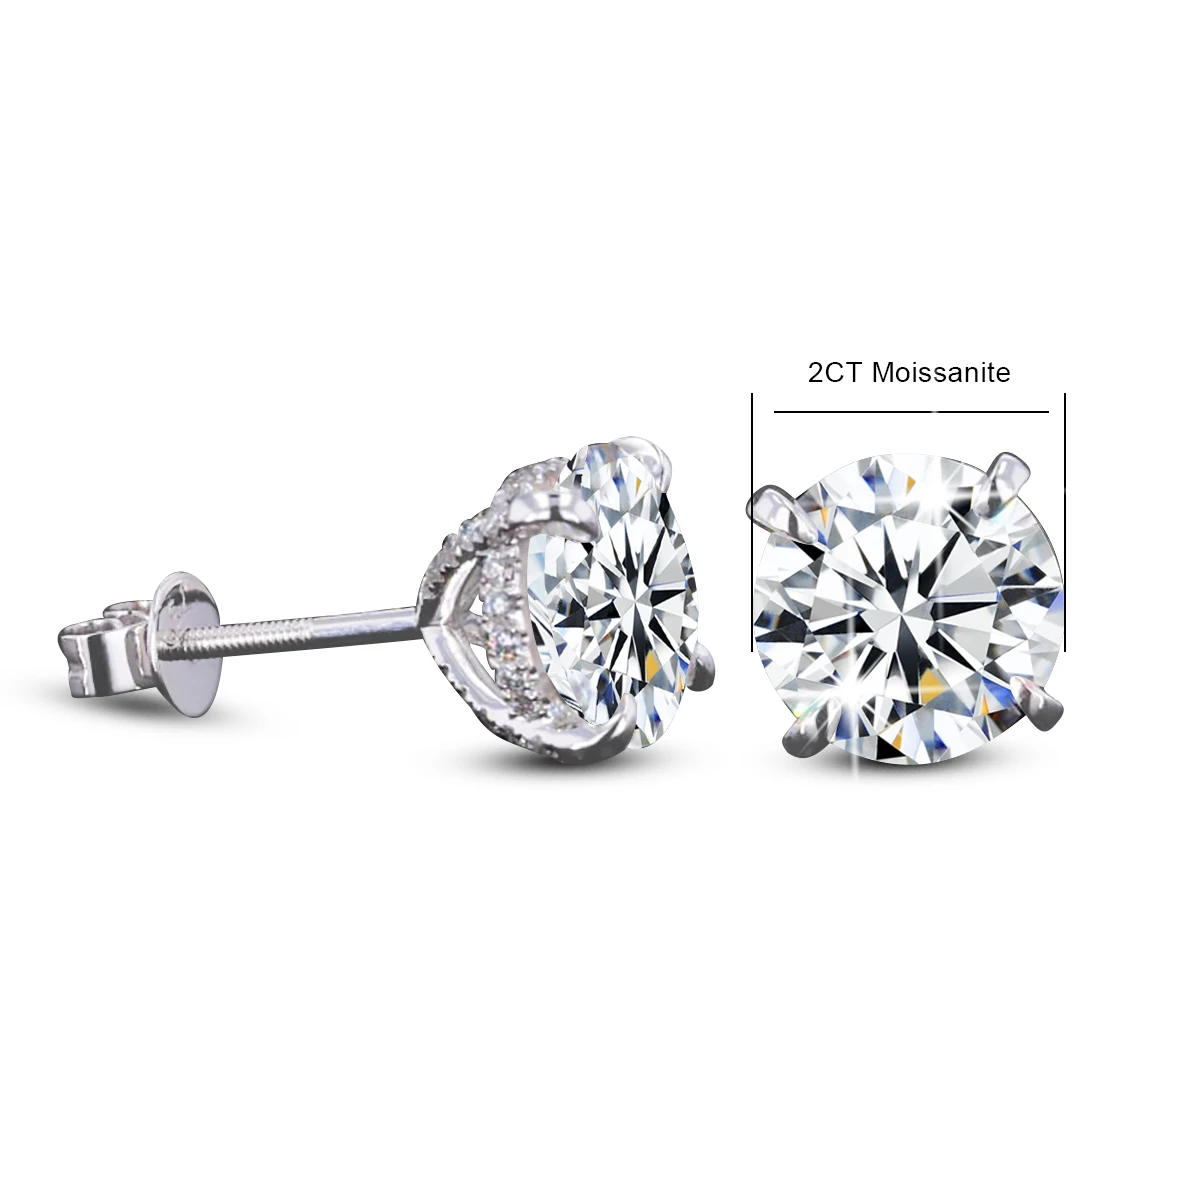 Luxury Gemstone 2ct Moissanite Stud Earrings with Certificate for Women 925 Silver Anniversary Accessoriy Classic Jewelry New in